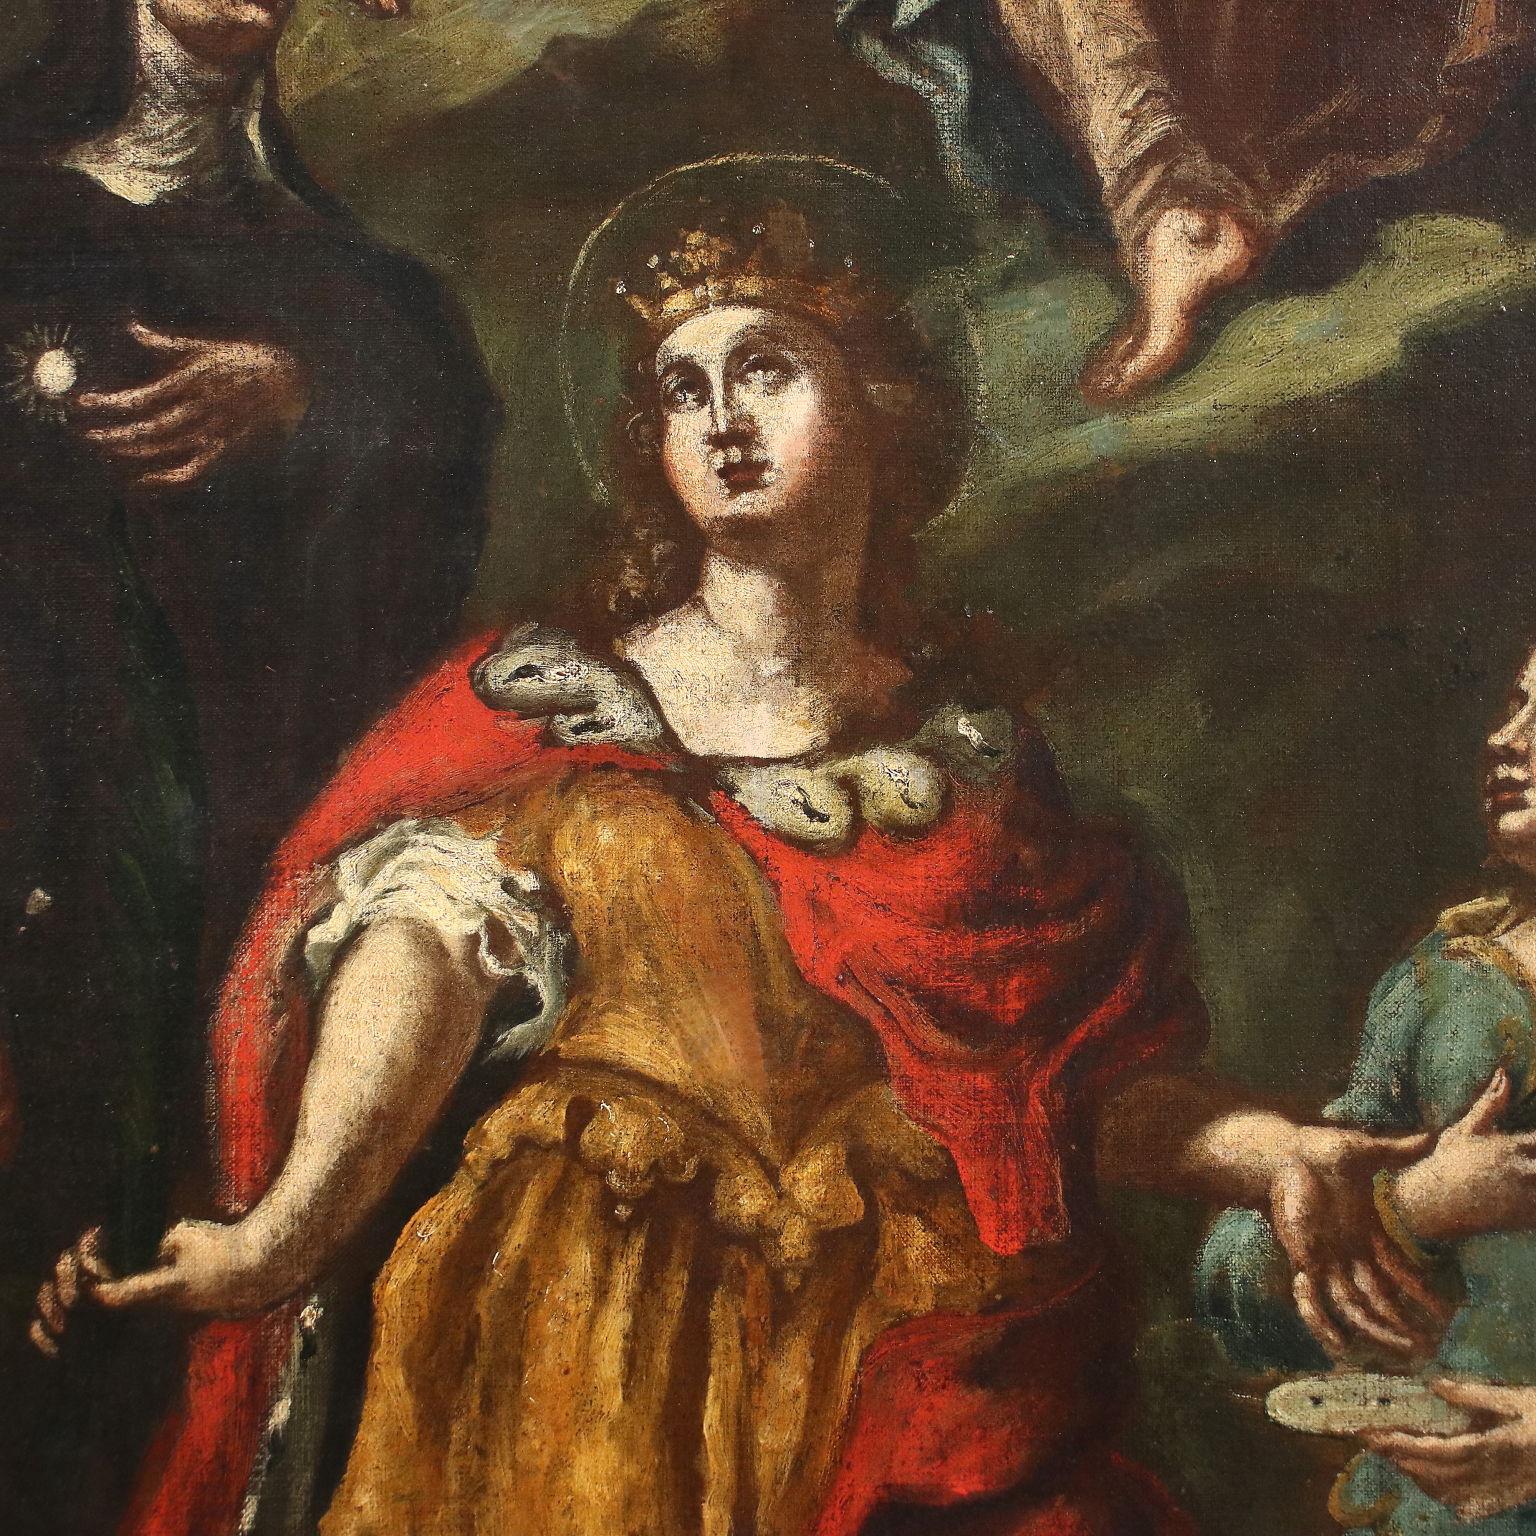 Madonna and Child with Saints, XVIIth - XVIIIth century - Other Art Style Painting by Unknown